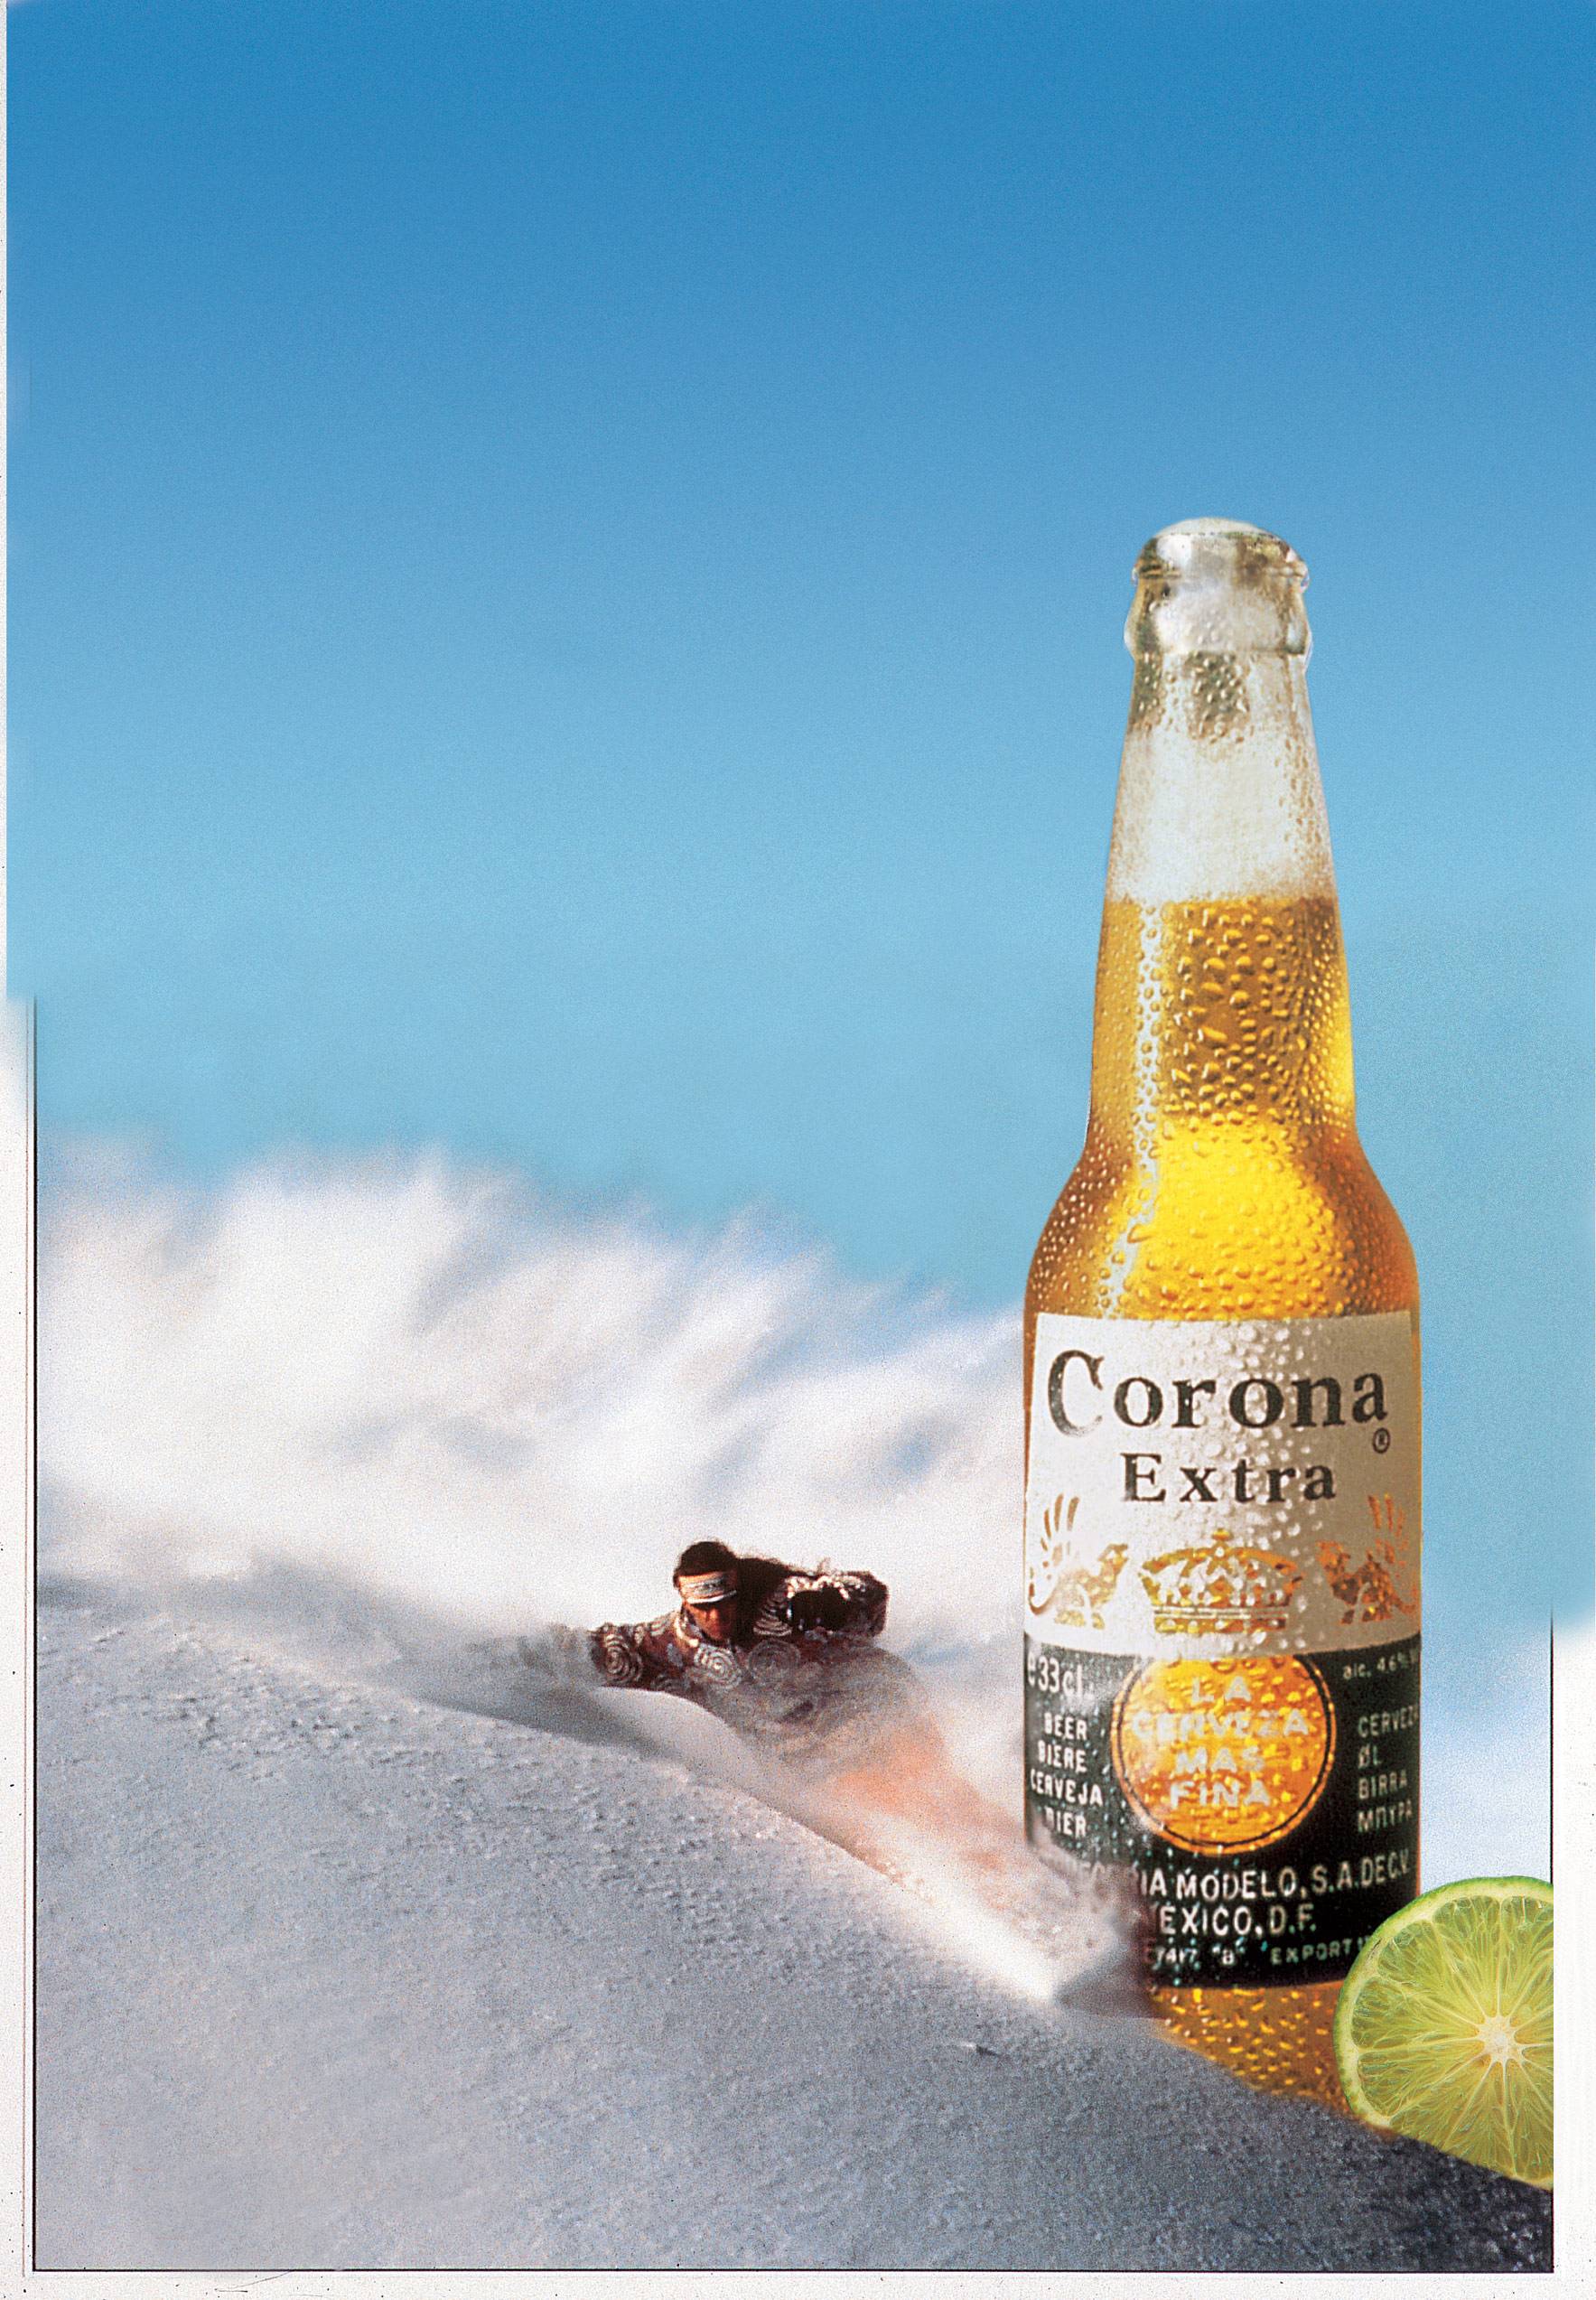 Wallpapers For > Corona Beach Wallpapers